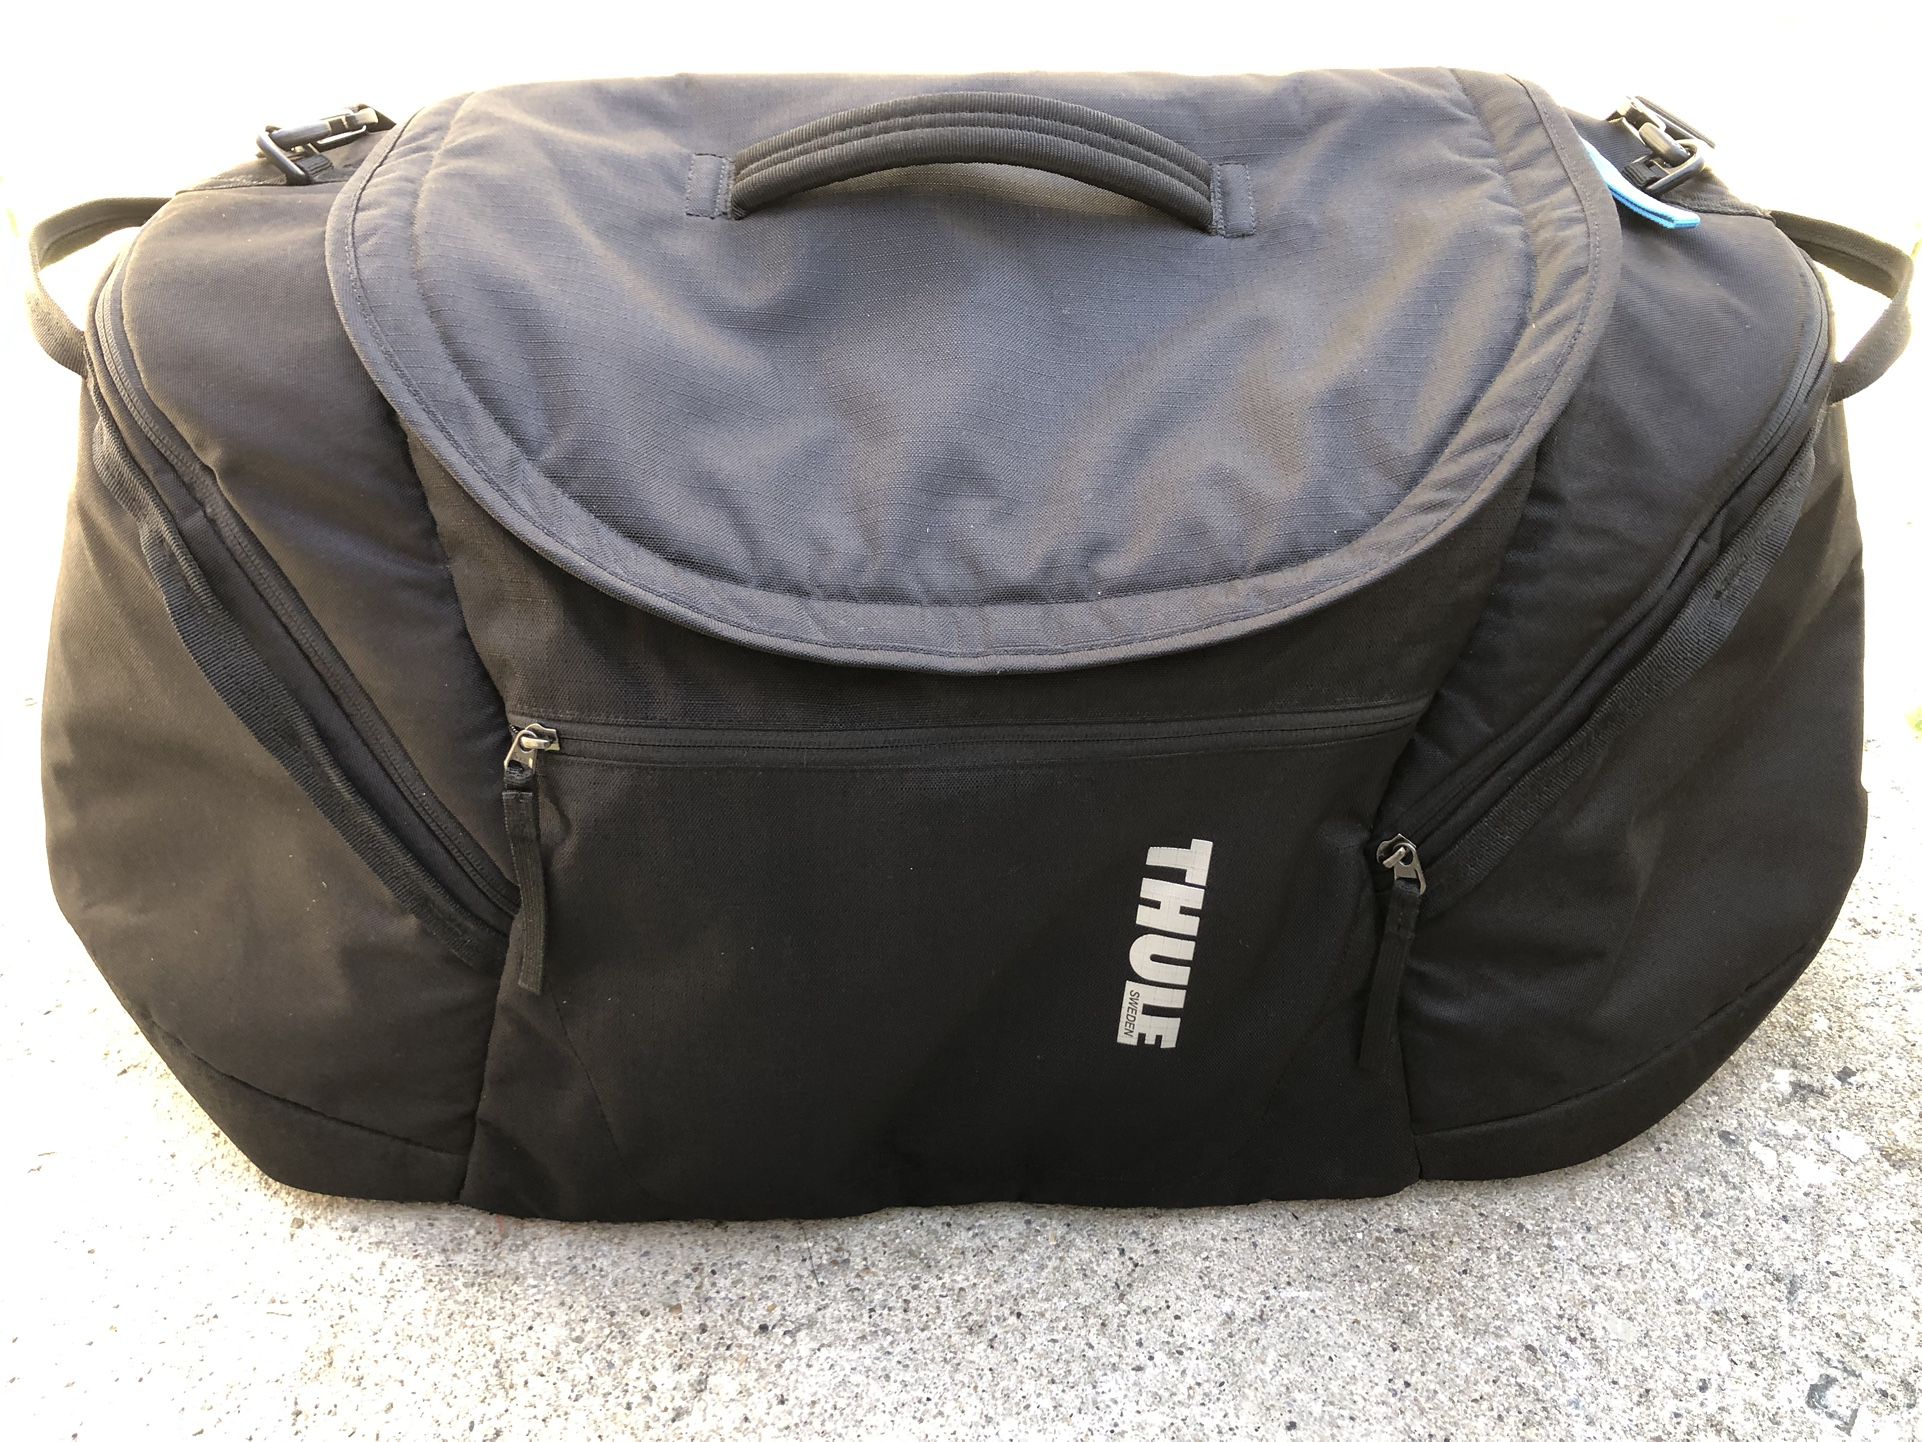 Thule Duffle Bag Good Storage Space For All Different Outdoor Sports . In excellent condition $40 firm